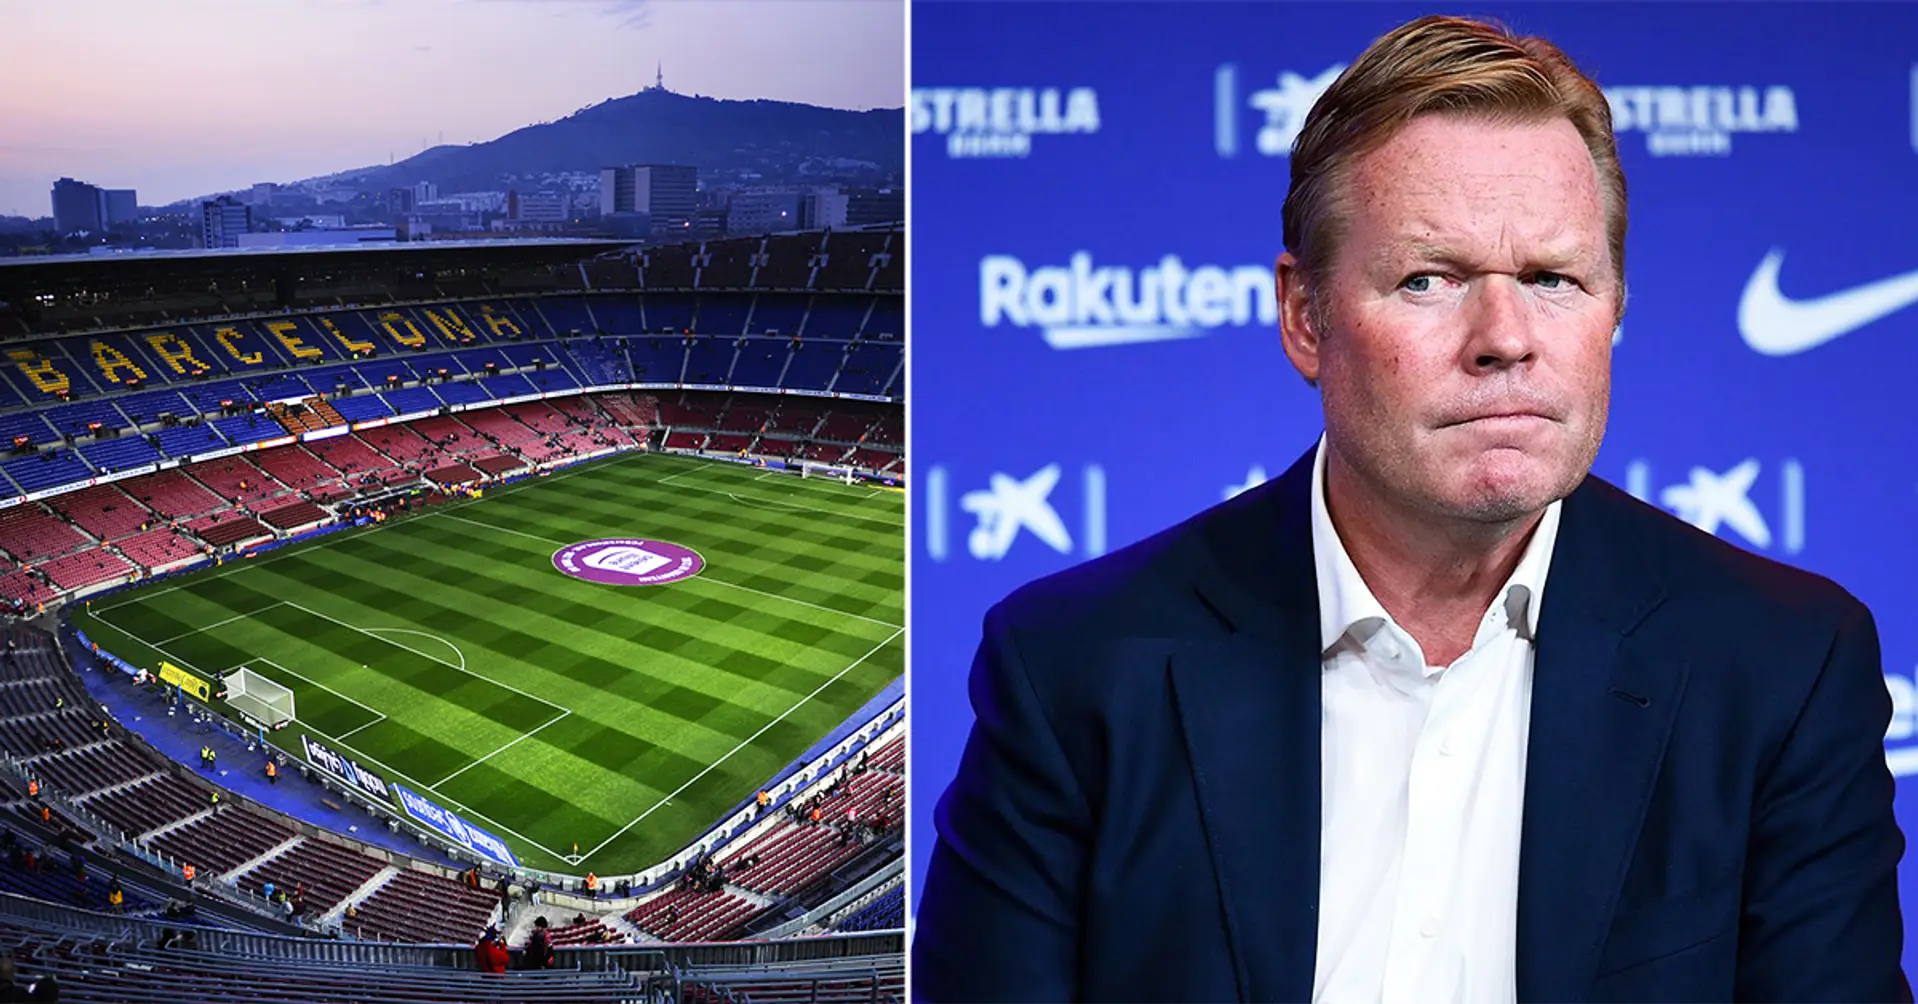 The next FC Barcelona coach after Koeman already revealed by Catalan journalist